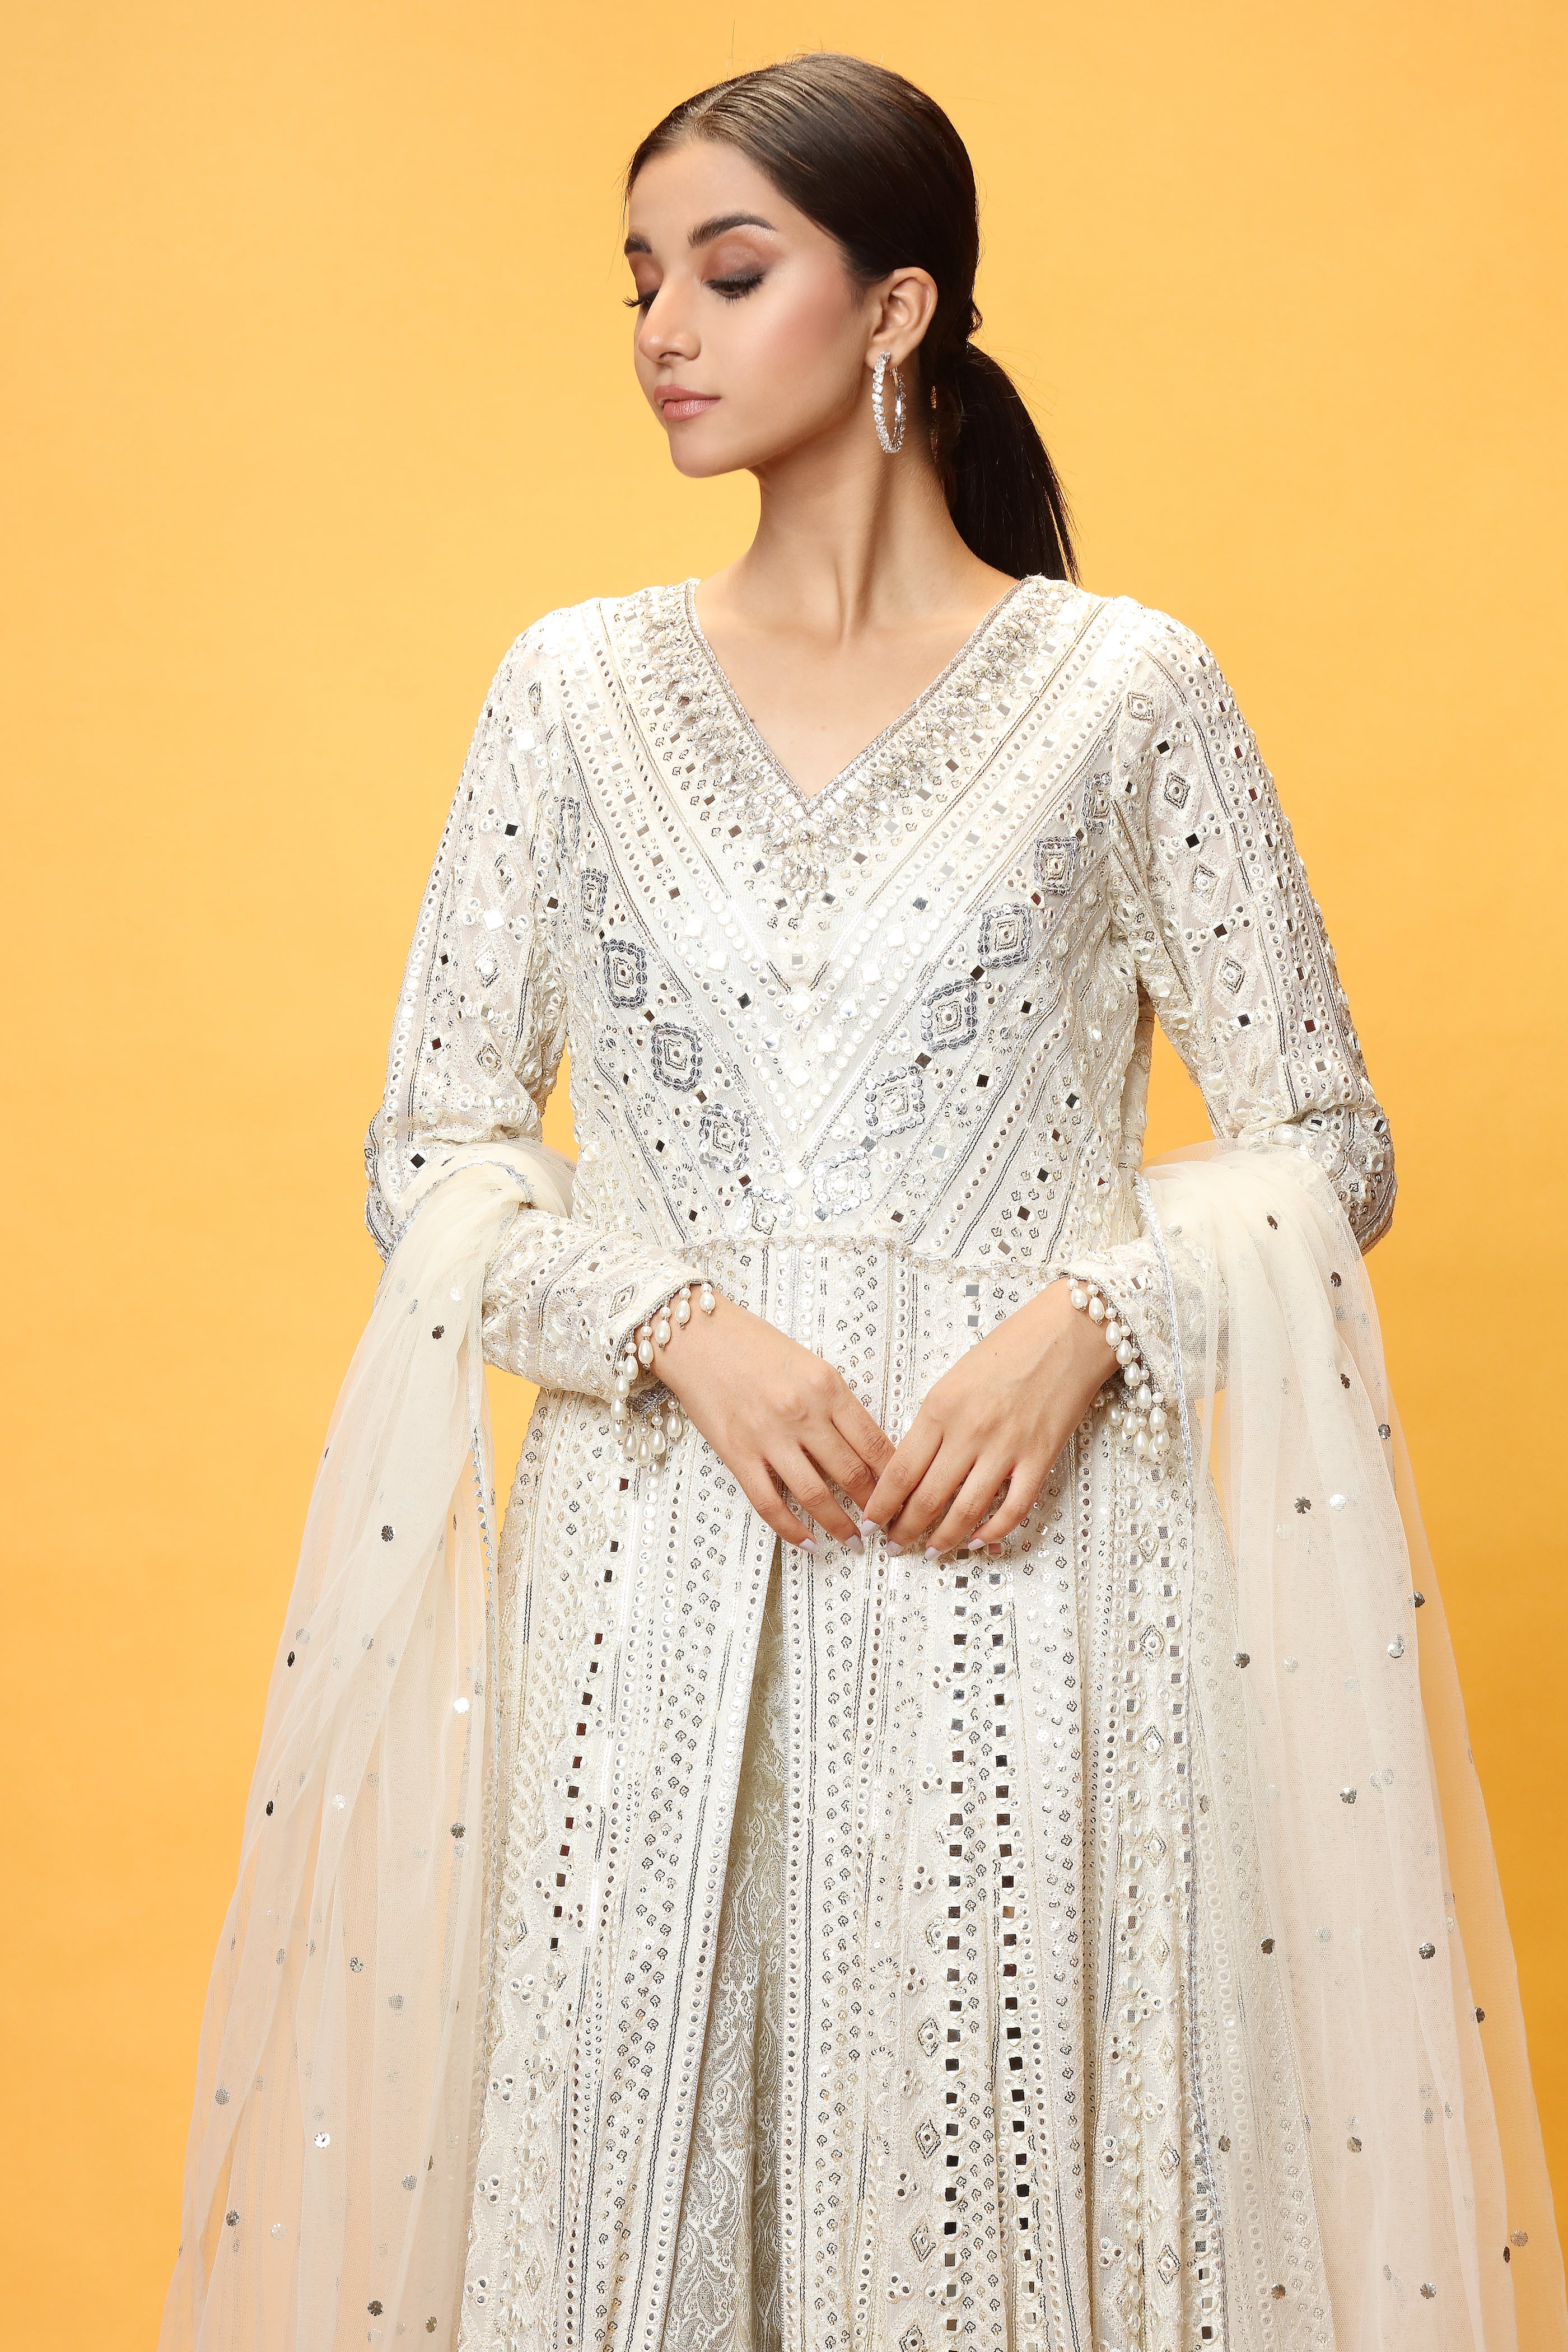 A stunning Dress made in chikanKari with Panni lines. Loaded with mirrors stitched in fabric and intricate stunning work on neckline in pearls.